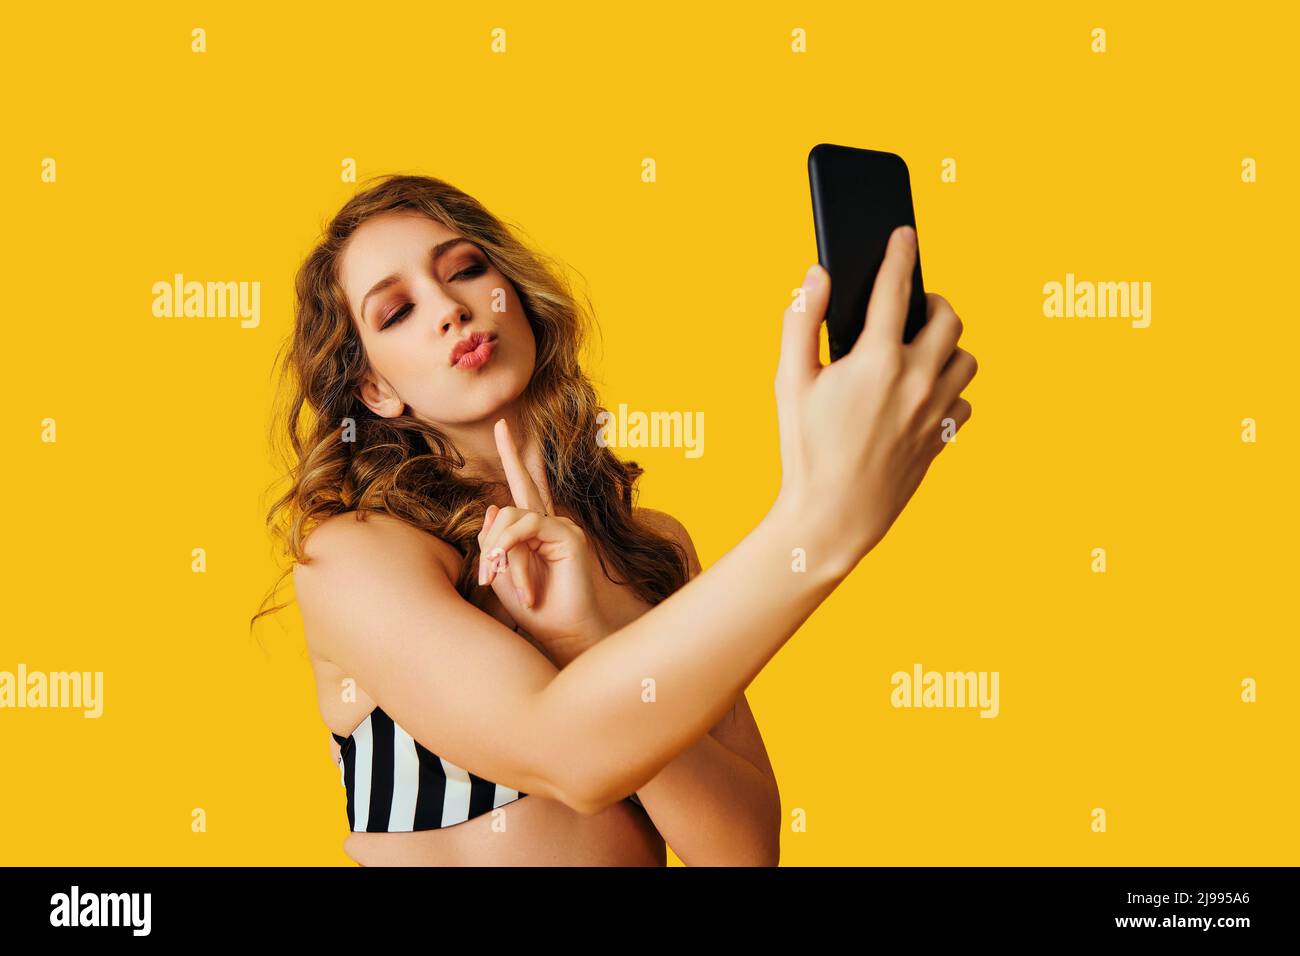 portrait of beautiful young woman texting flirt selfie photo message with smartphone on yellow background studio Stock Photo